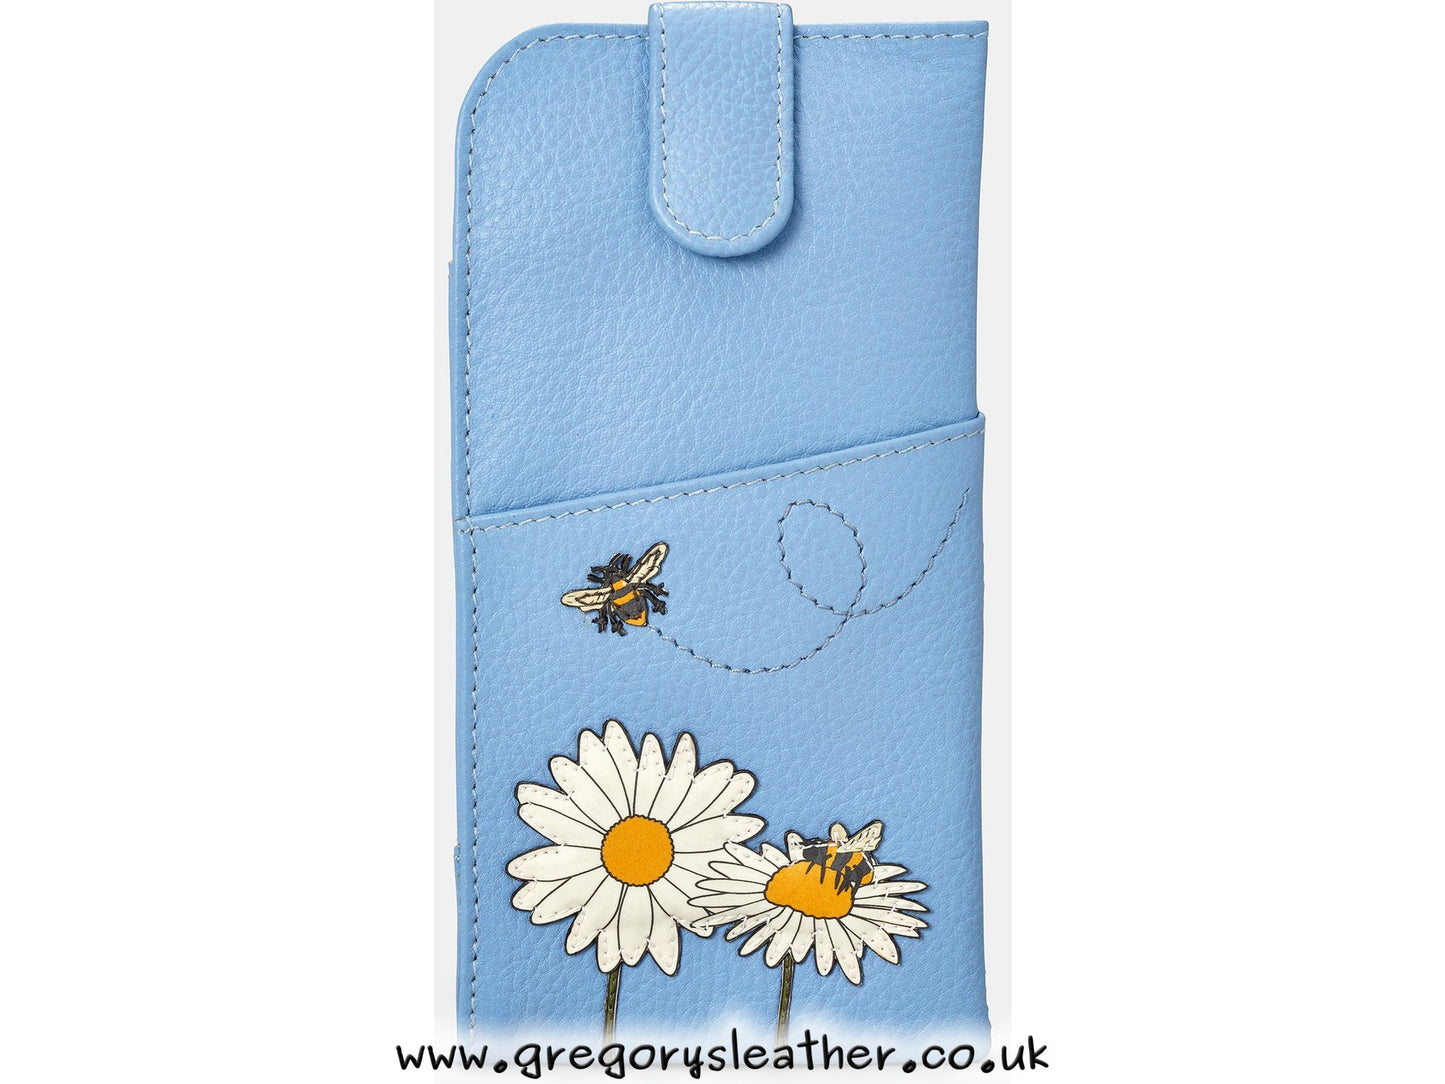 Blue Bee Happy Leather Glasses Case by Yoshi